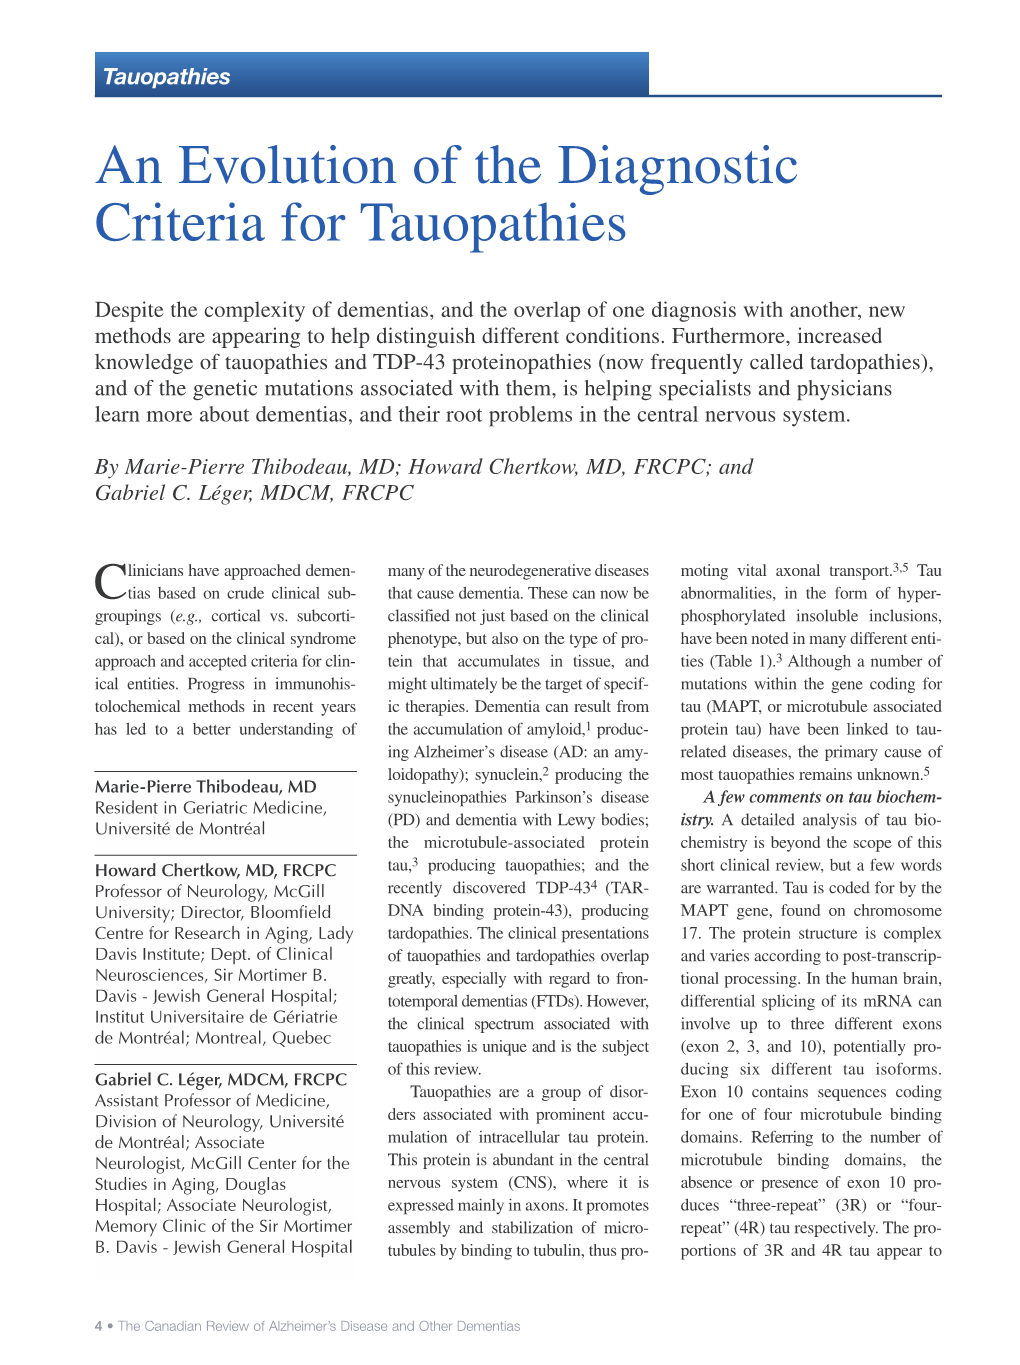 An Evolution of the Diagnostic Criteria for Tauopathies